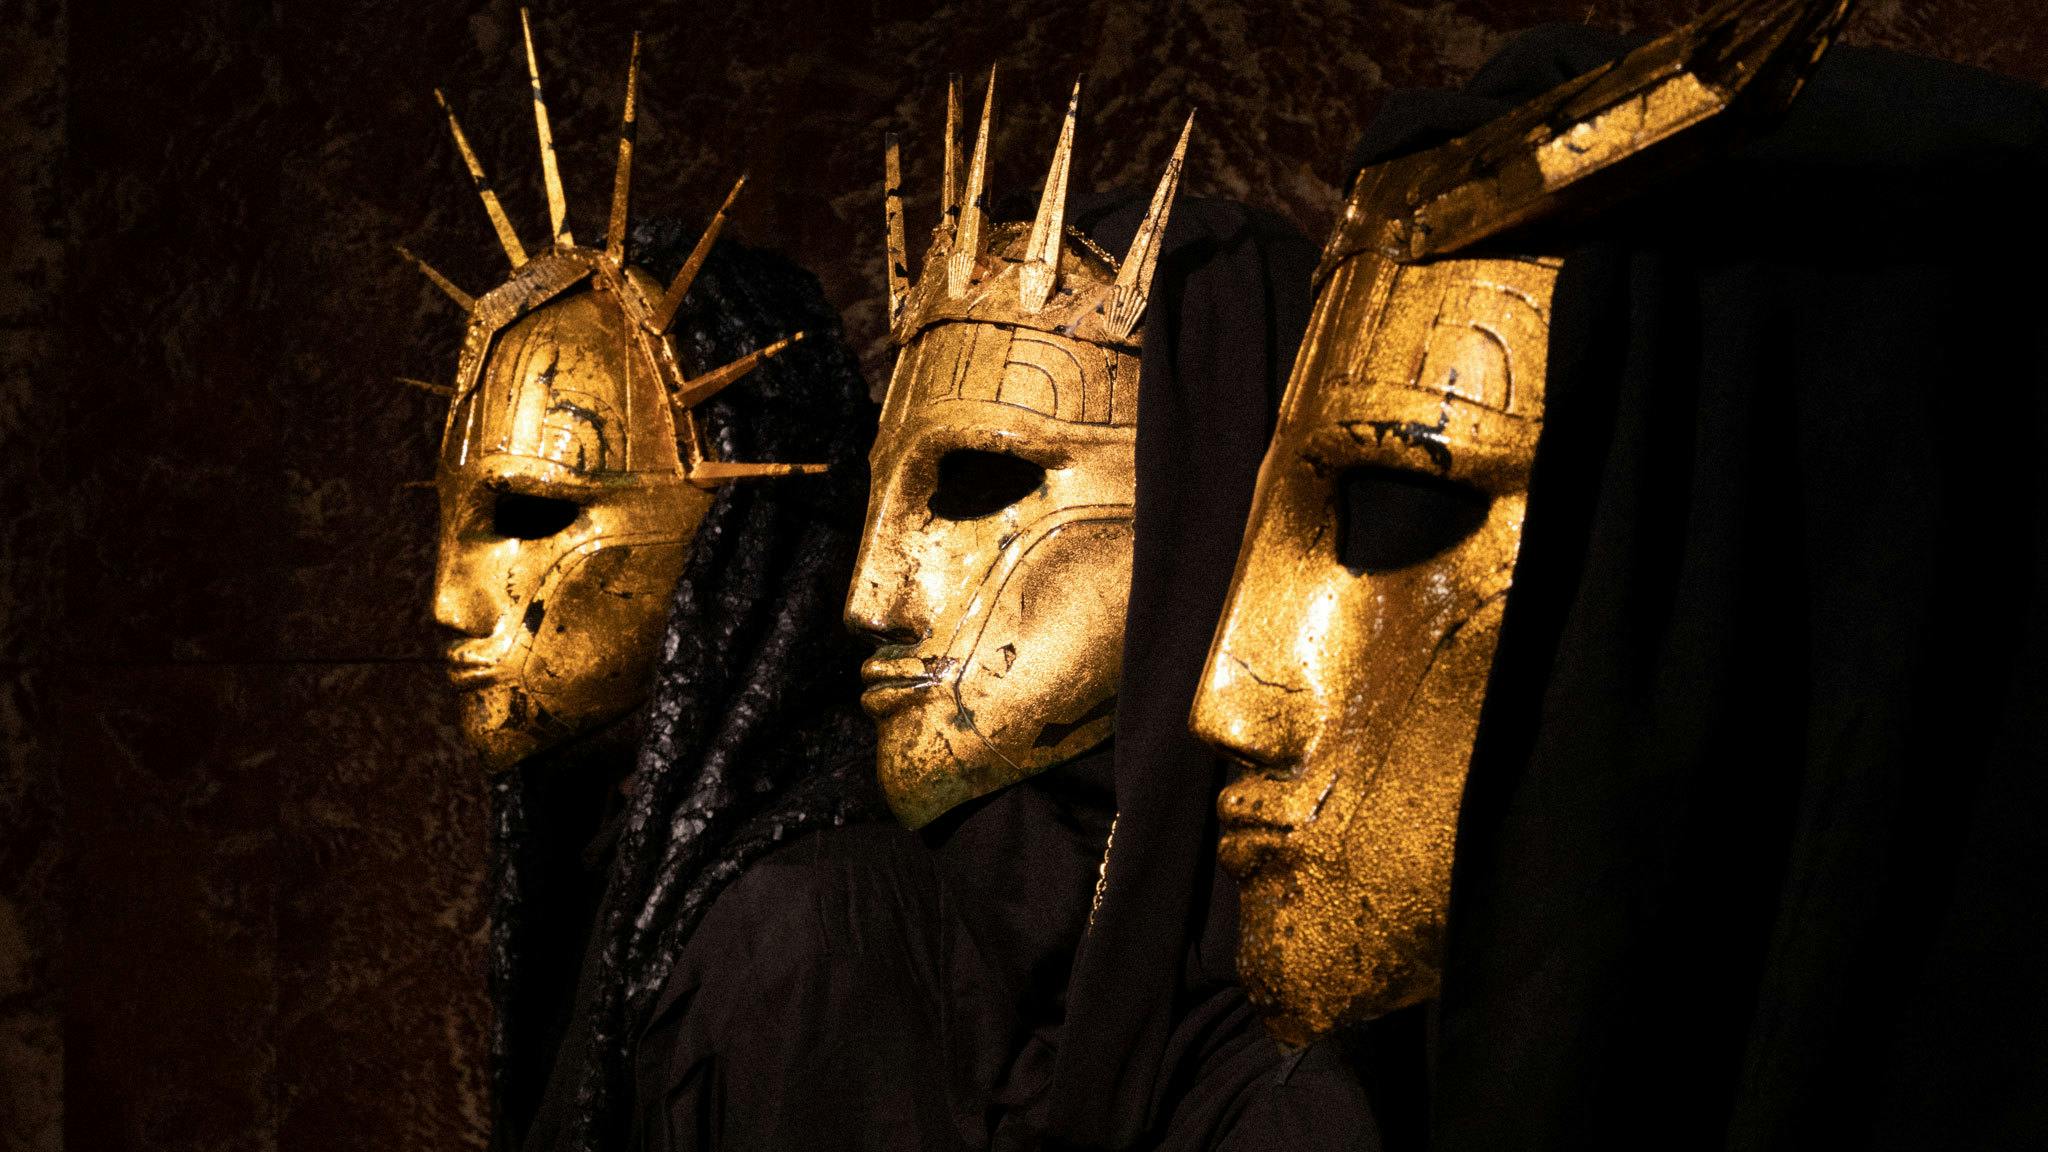 “This is challenging music, but there is reward in that”: How Imperial Triumphant tapped into the Spirit Of Ecstasy